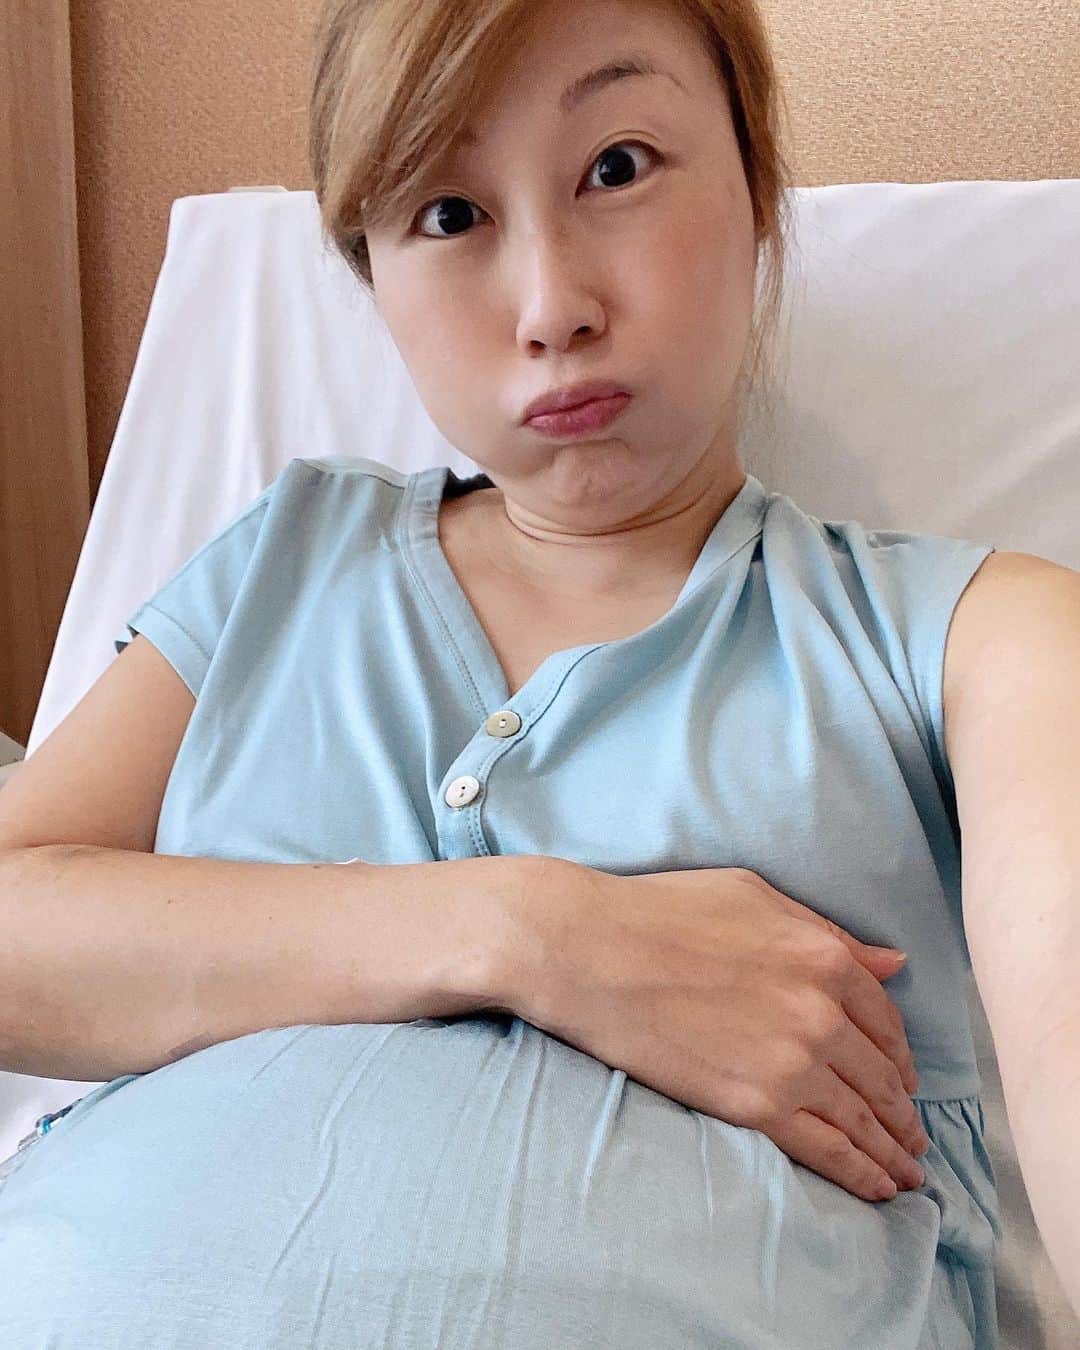 吉田ちかさんのインスタグラム写真 - (吉田ちかInstagram)「Hey guys! It’s been a week since I checked into the hospital and I’m at 36 weeks today🤰  One more week and the baby is safe to come out whenever! So if all is stable, I’ll be going home next week. Although I might have to come right back lol No way to predict when this baby will decide to really come out!   With plenty of bed rest and an IV to prevent stomach tightening, I’m actually able to eat more than I could back home so the baby is getting lots of nutrients and growing fast! His head is apparently 2 weeks bigger than average😅 no wonder my tummy feels so heavy!   I don’t know how I would have managed if I were at home! I know this is tough for Pudding and Osaru-san, but I’m so thankful to be here getting the rest I need.   Pudding has been surprisingly understanding of the situation. She cried the first few days, but now when we video chat, she finishes the conversation with a kiss and an I miss you! I love you! and hangs up with a smile😊  I know it’s probably harder on her than she lets on, but I think she feels like she needs to step and and be the big sister! She’s been really good throughout all of this and I’m so proud of her!   入院してから1週間経ち、今日で36周目に入りました。あと1週間でbabyがいつ産まれてもいい状態になるので、このまま状況が落ち着いていれば来週一旦退院する予定です☆ その後、すぐに陣痛とかが来るかもしれませんがw こればかりはわからない！  ベッド生活と点滴で、お腹の張りもだいぶ落ち着いてきたので、家にいた時よりもご飯が食べられるようになってしまいw babyにかなり栄養がいってるようでどんどん大きくなっています。頭が平均より2週間大きいとか😅 通りで重いw   家にいたらどうなってたか… プリンとおさるさんには大変な思いをさせてしまってますが、入院できて感謝です🙏  プリンも私が病院にいることは仕方ないことだと理解してくれているみたいで、最初の数日間はビデオ電話で泣いていましたが、今は結構さっぱり！おしゃべりして、最後に I Miss you! I love you! 😘と言って笑顔で切ってくれますw  本当は我慢しているのかもしれませんが、big sisterを意識してくれているのかかなりいい子にして頑張ってくれているので助かっています❤️」10月1日 19時45分 - bilingirl_chika